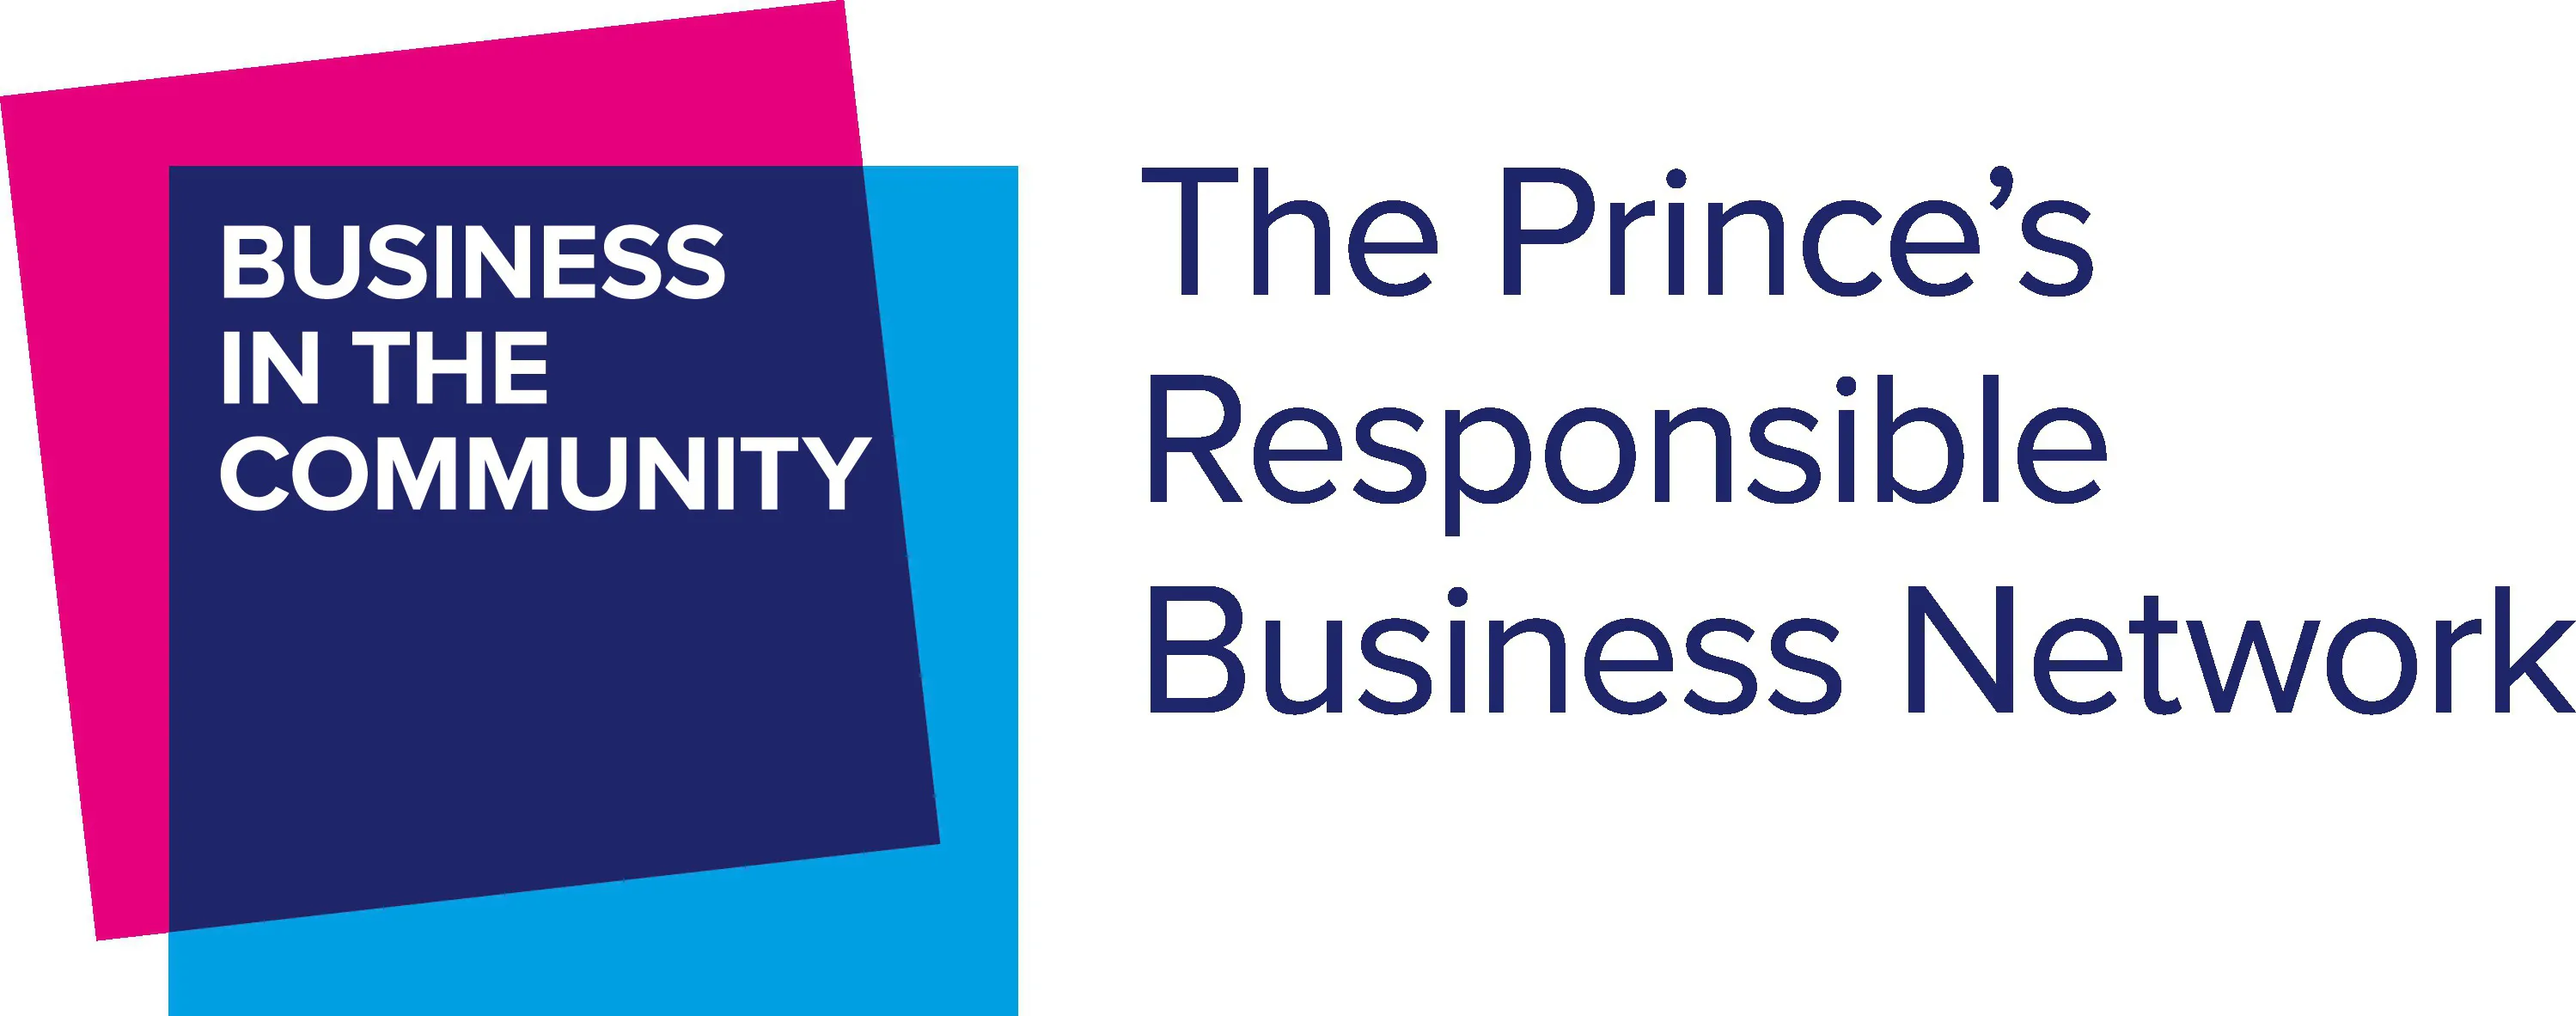 The Prince's Responsible Business Network Accreditation